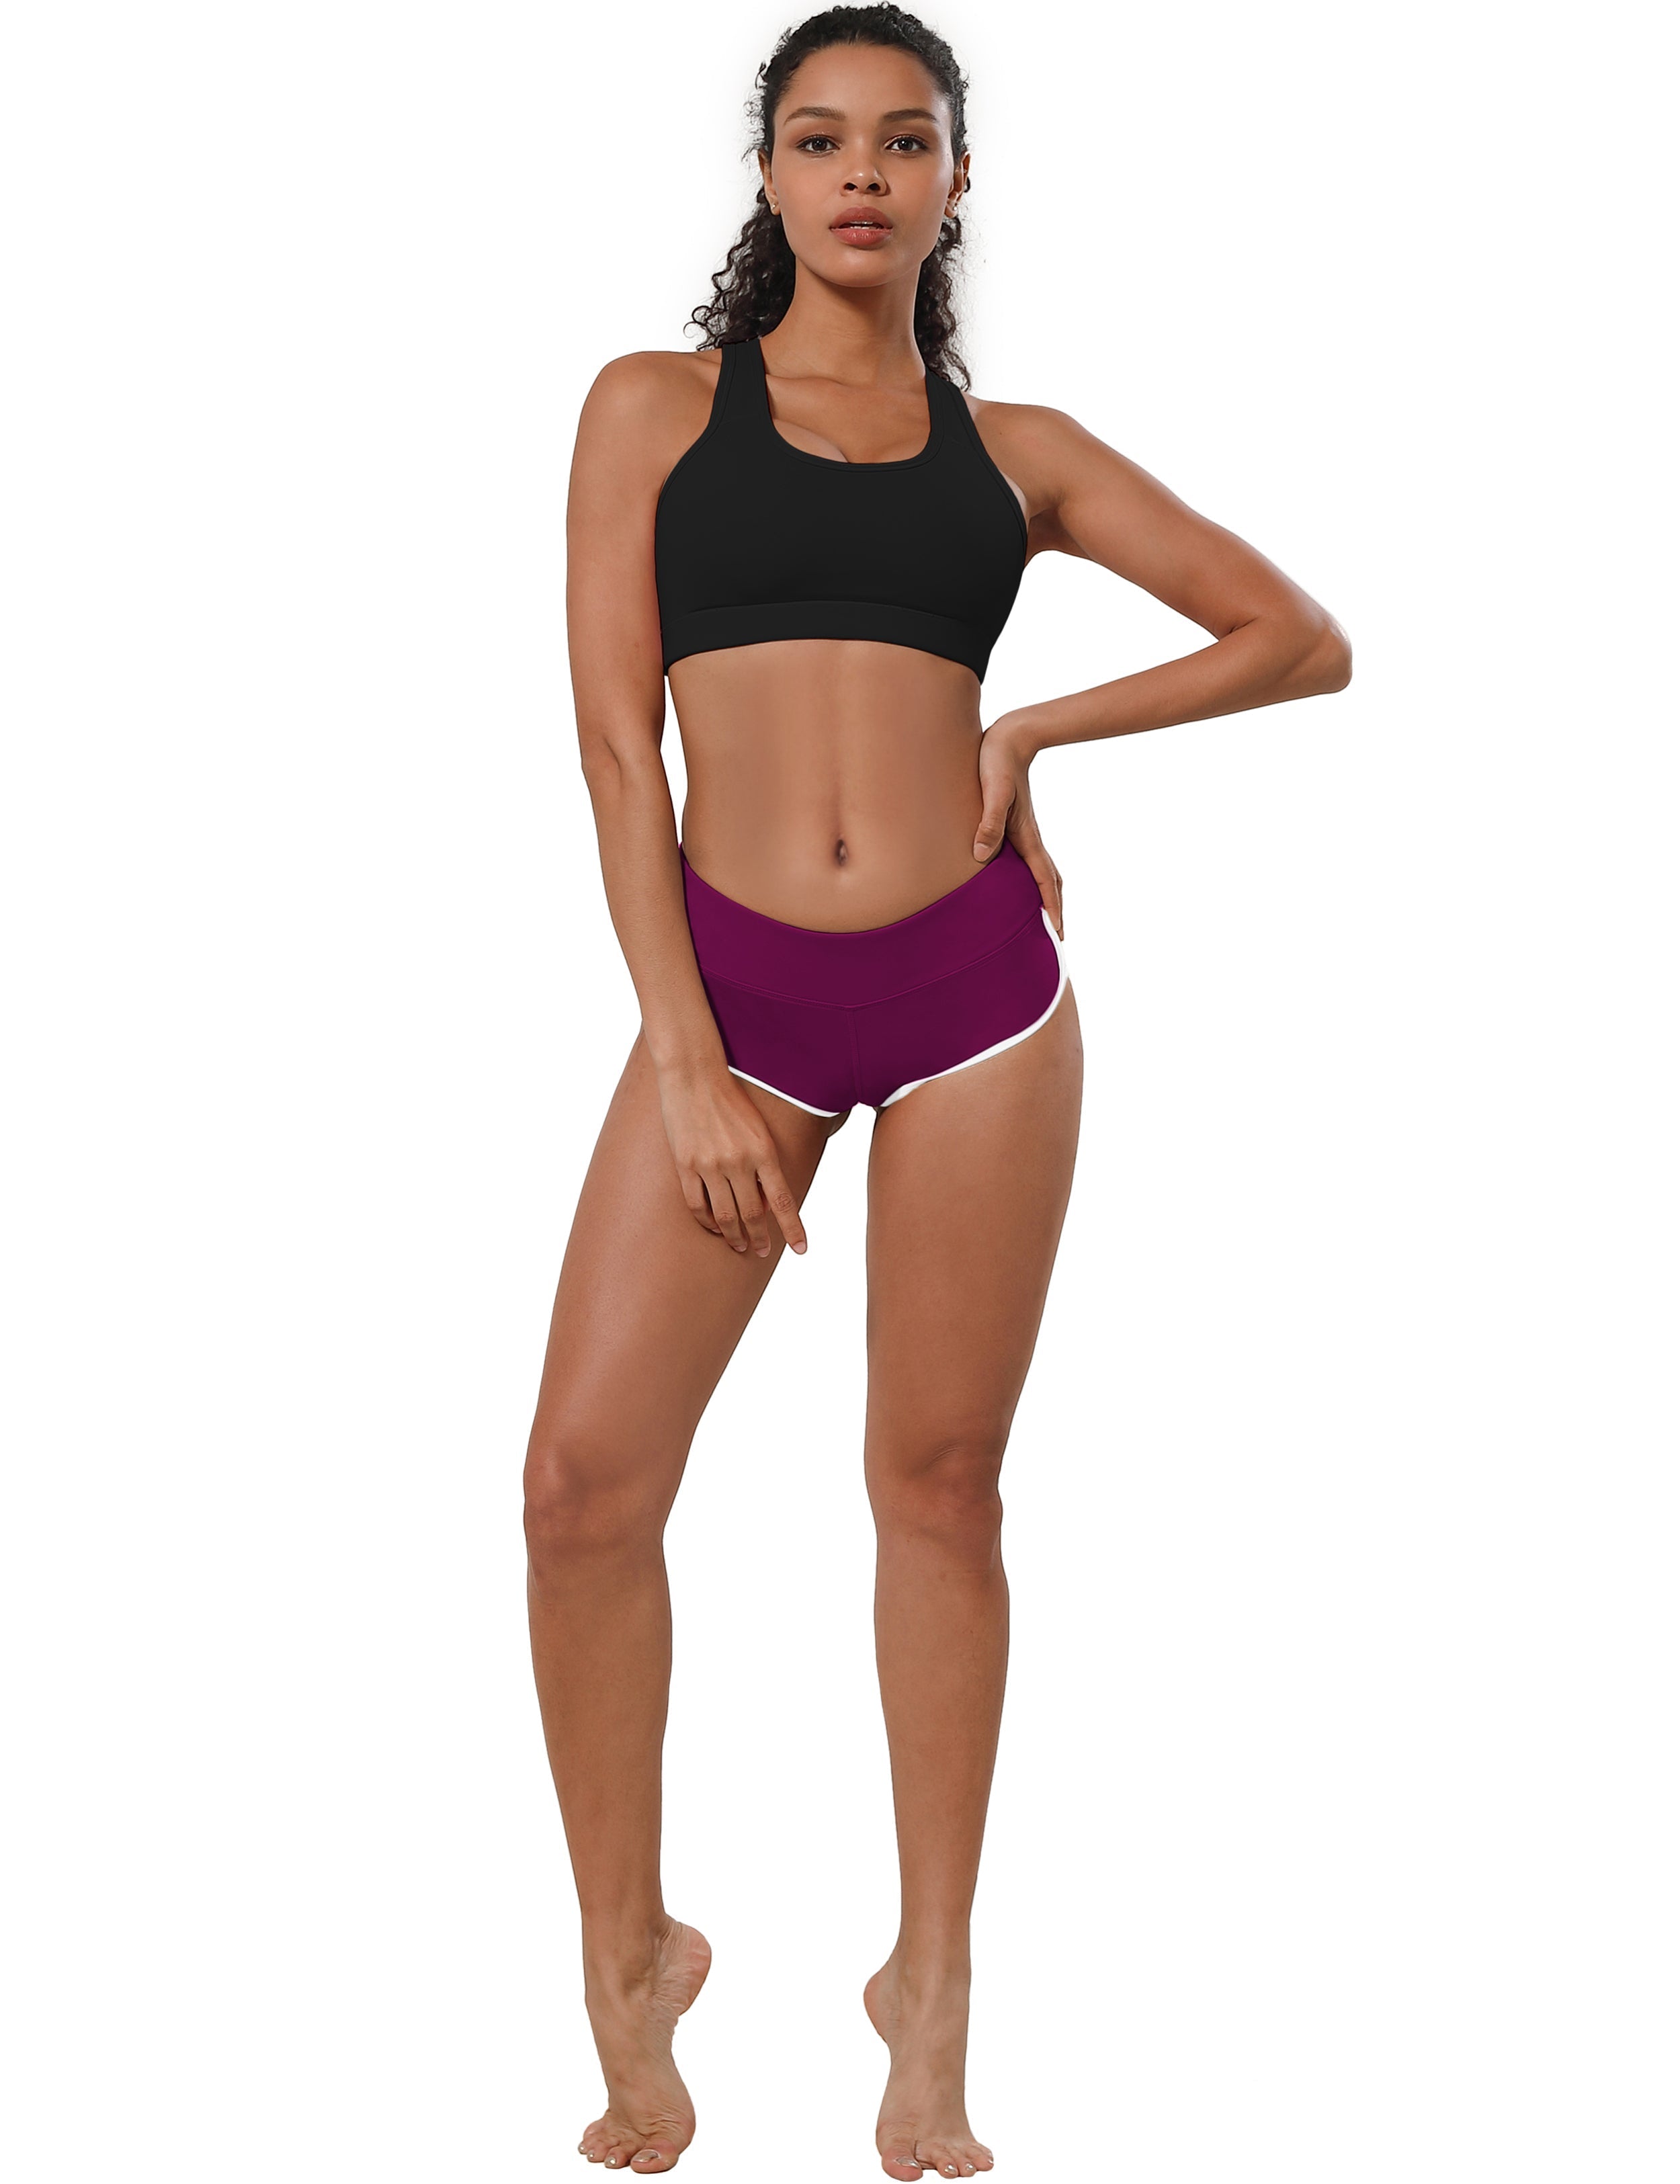 Sexy Booty Jogging Shorts grapevine Sleek, soft, smooth and totally comfortable: our newest sexy style is here. Softest-ever fabric High elasticity High density 4-way stretch Fabric doesn't attract lint easily No see-through Moisture-wicking Machine wash 75%Nylon/25%Spandex